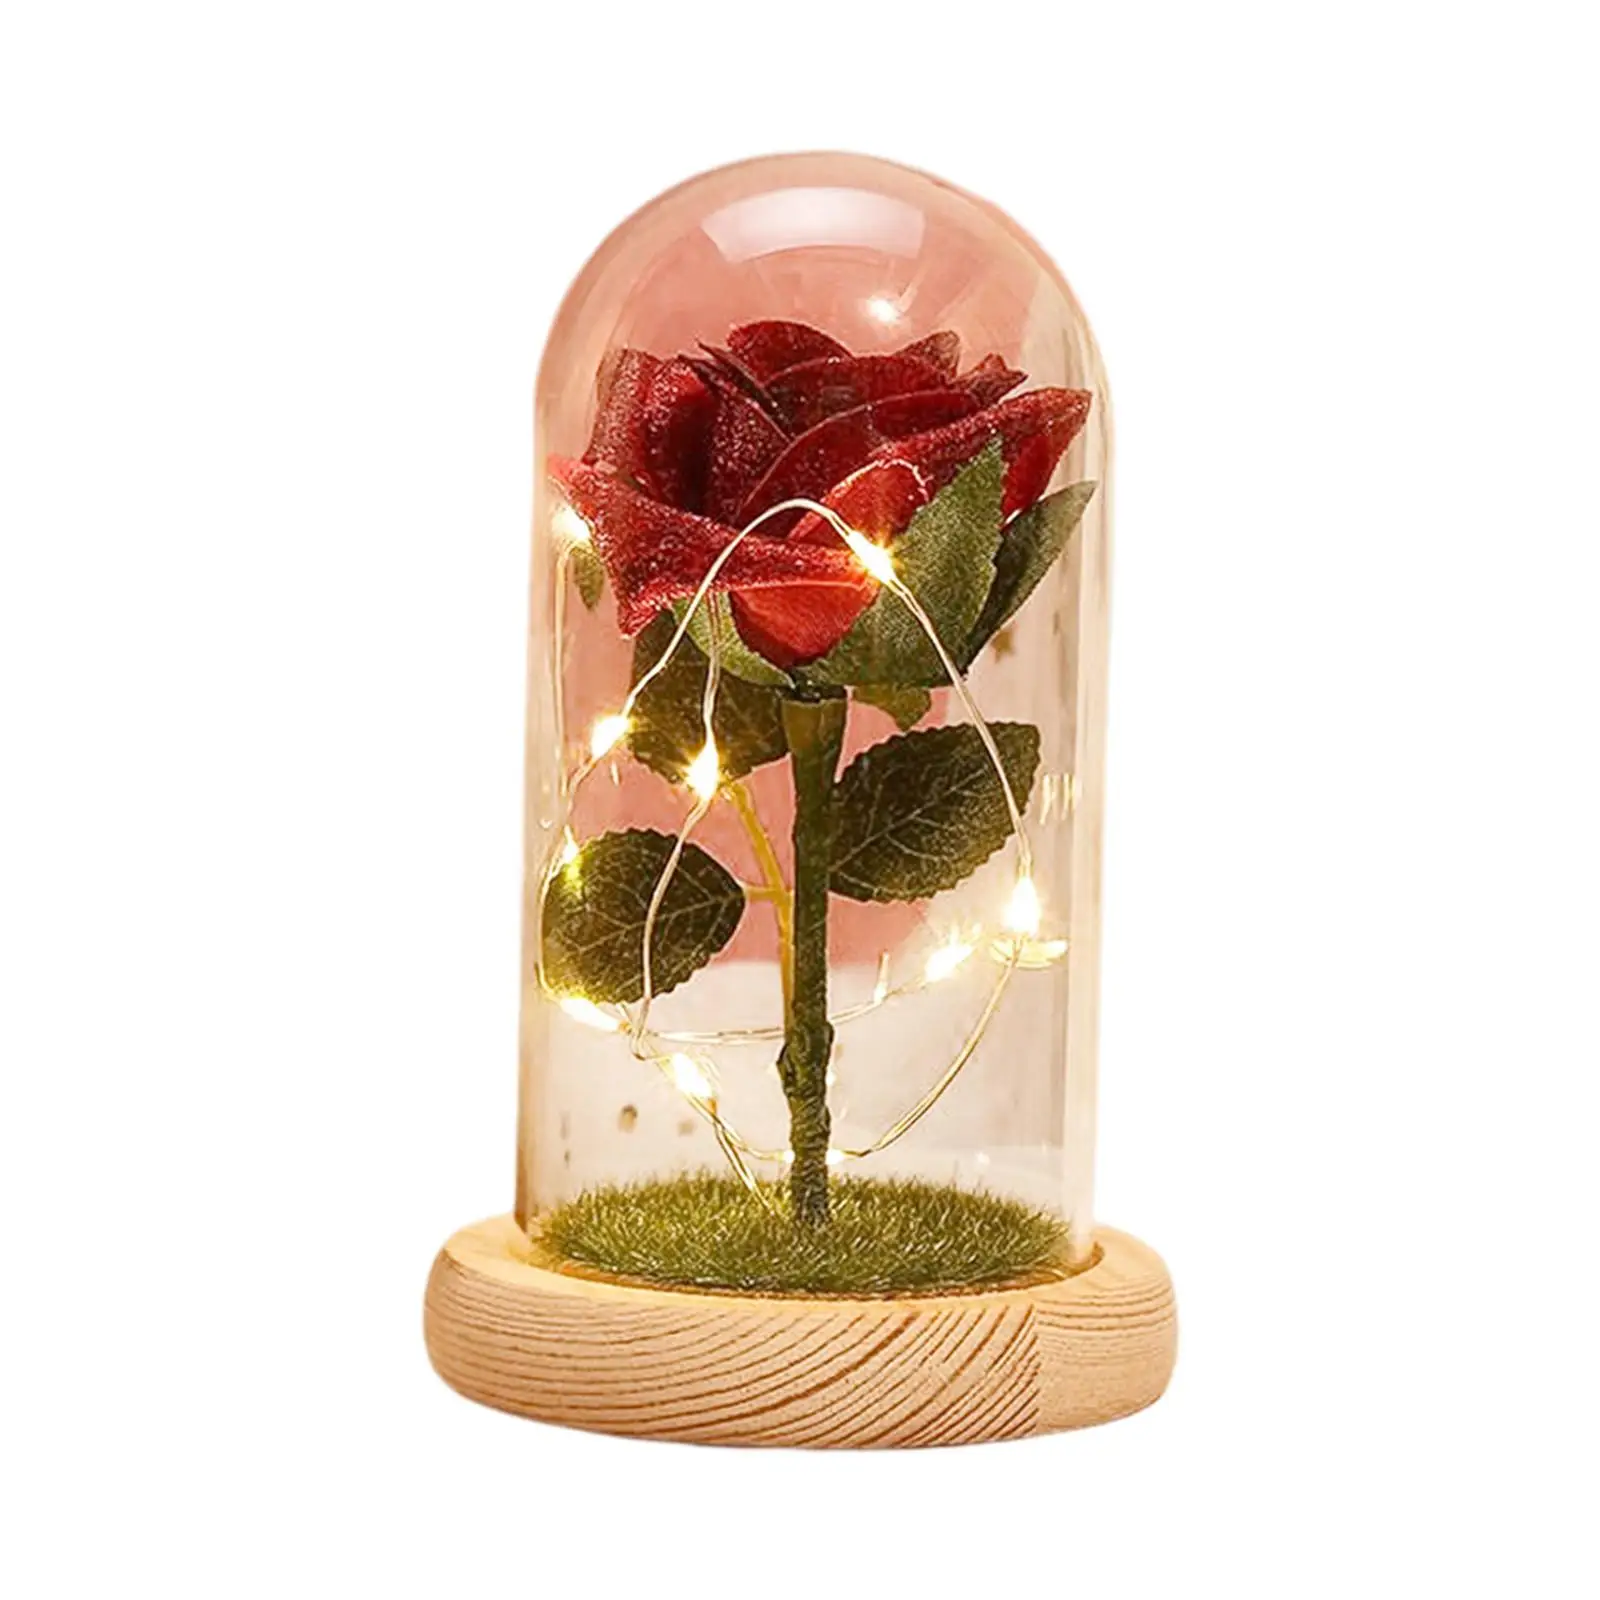 Romantic Light up Rose Preserved Night Light with Base Ornaments for Gift Anniversary Birthday Girlfriend Home Decoration